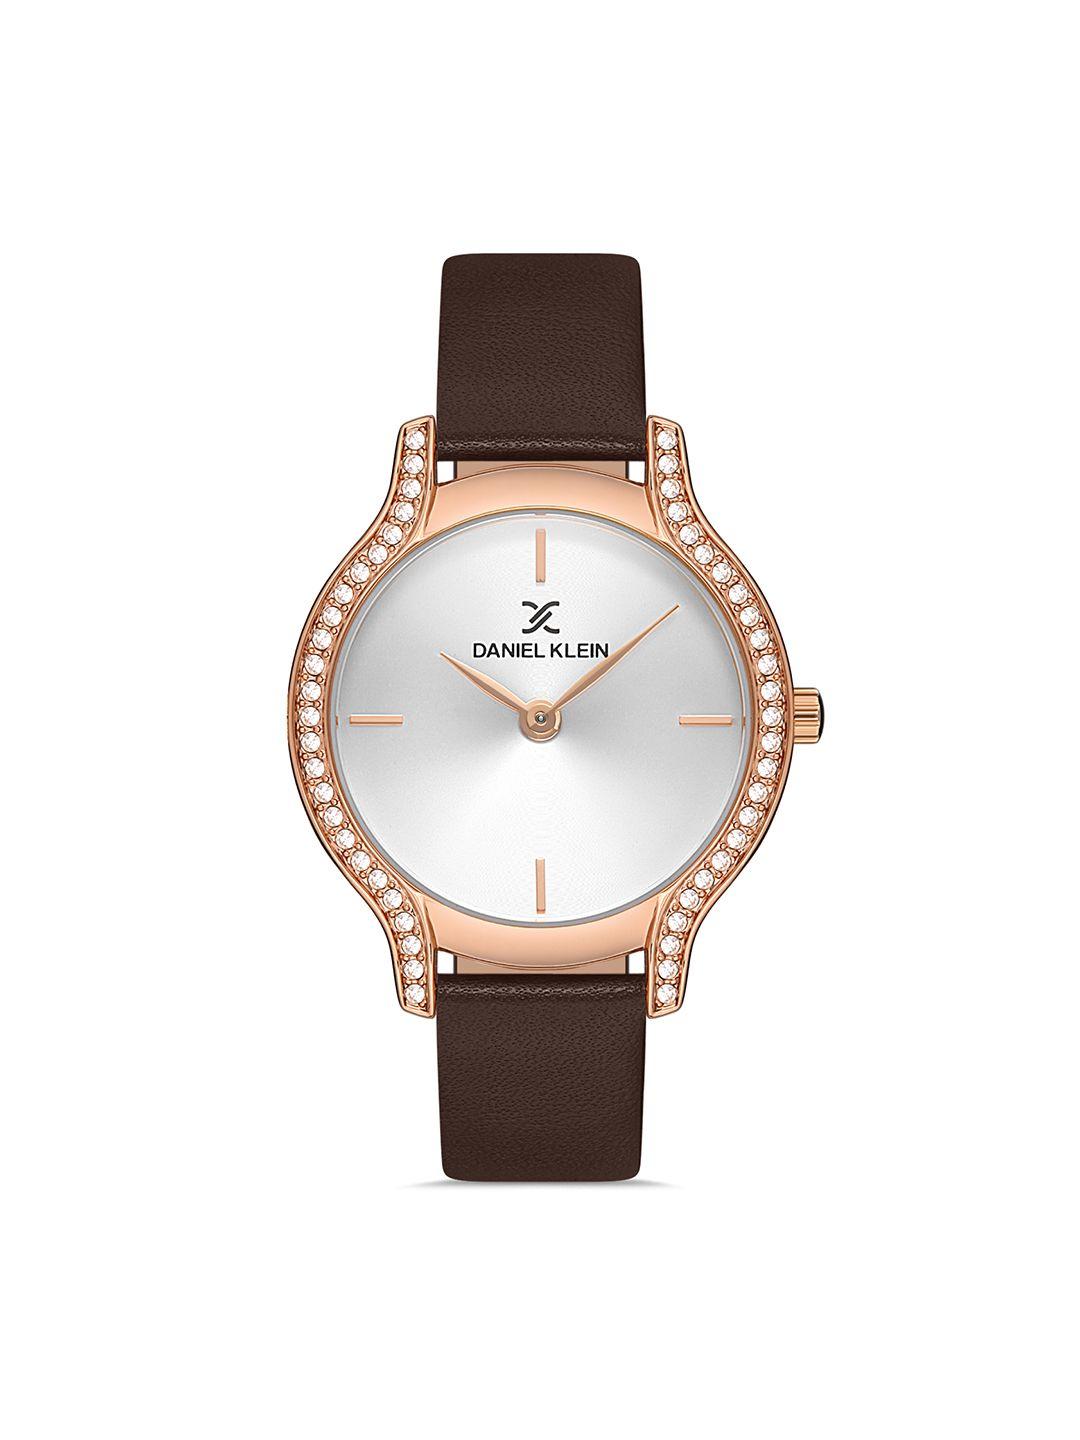 daniel-klein-silver-toned-embellished-dial-&-brown-leather-straps-analogue-watch